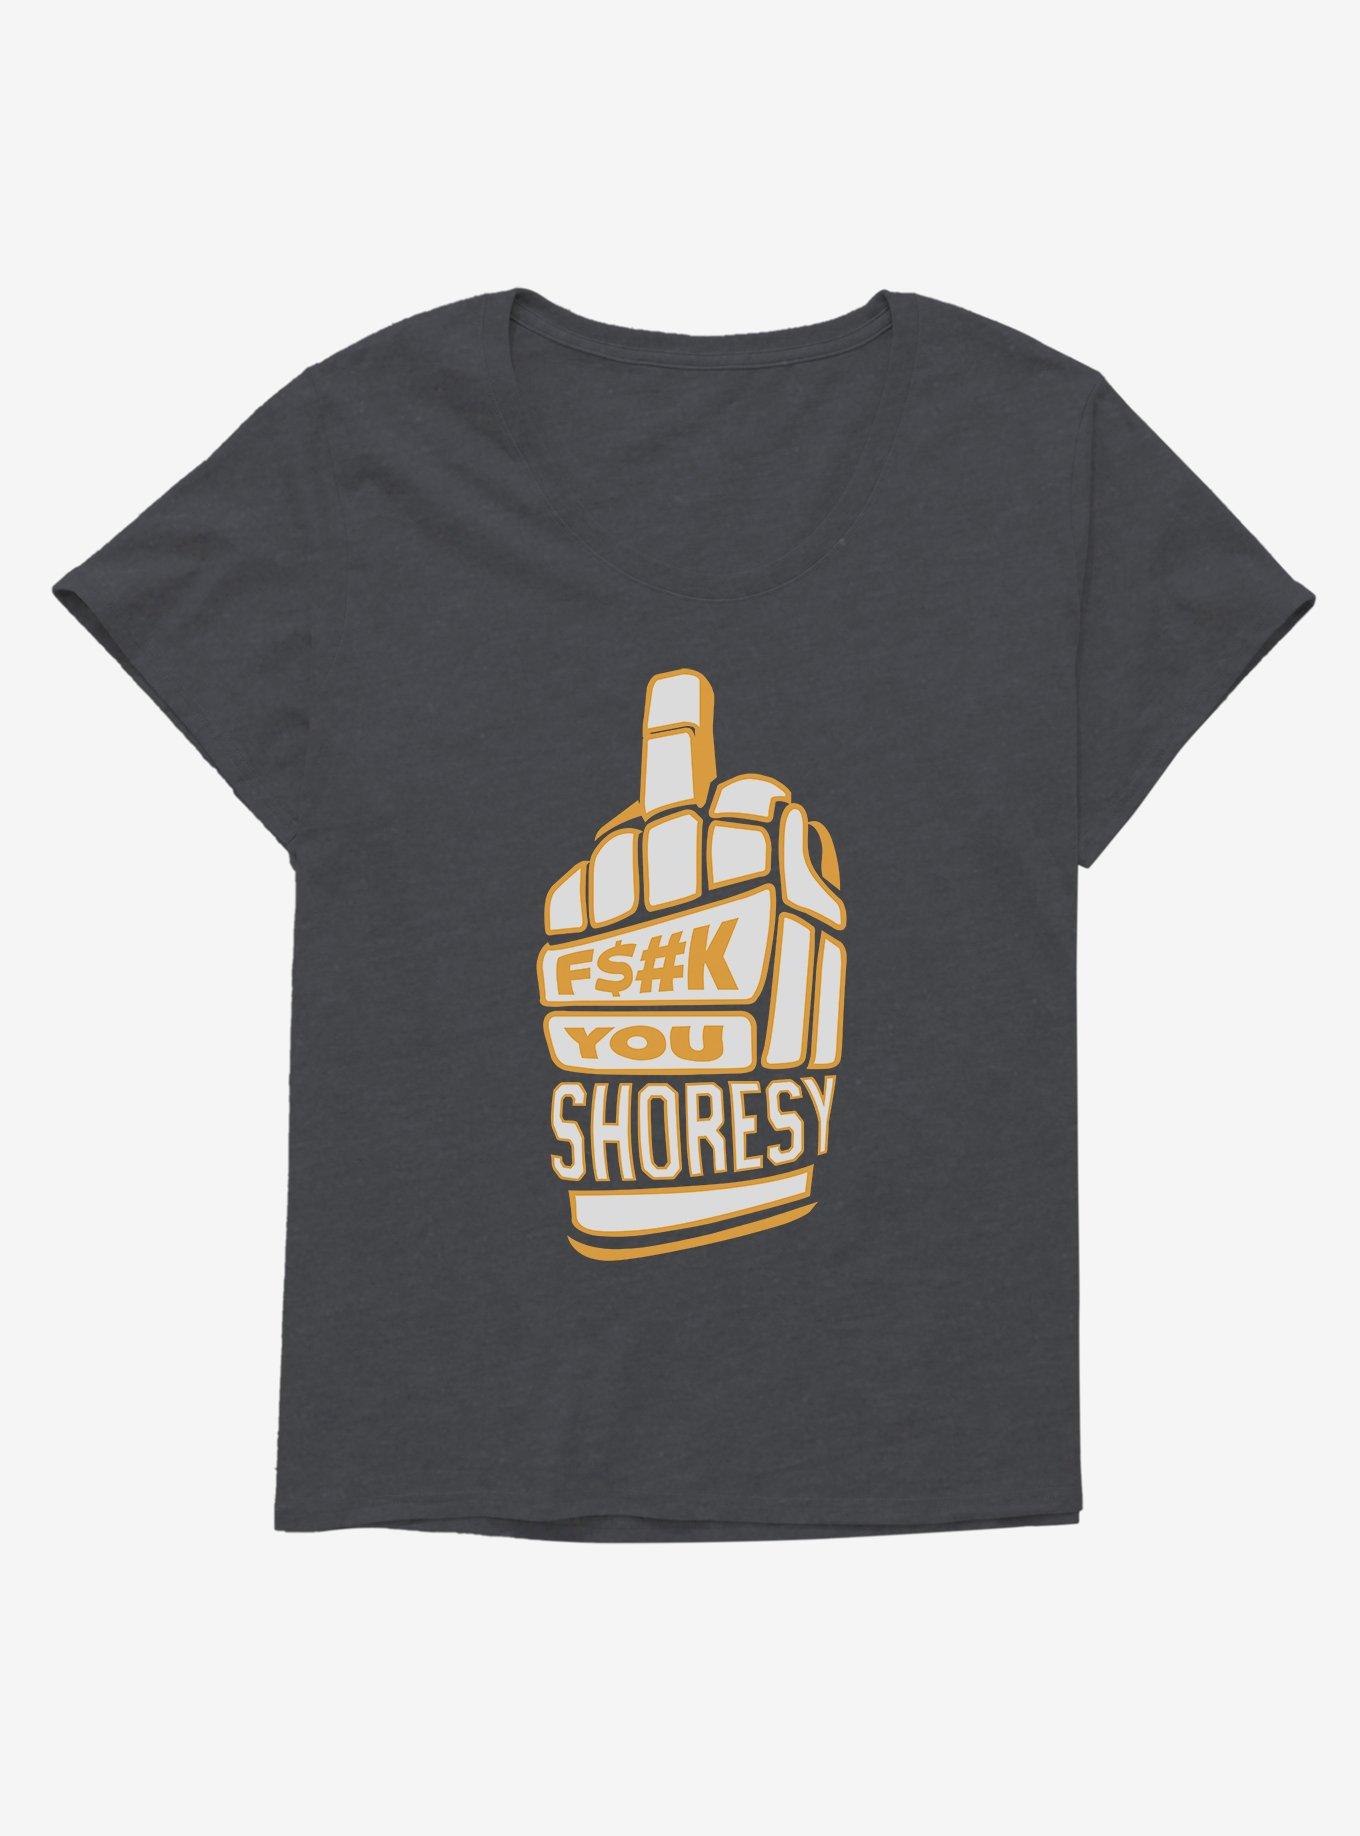 Shoresy F You Finger Girls T-Shirt Plus Size, CHARCOAL HEATHER, hi-res